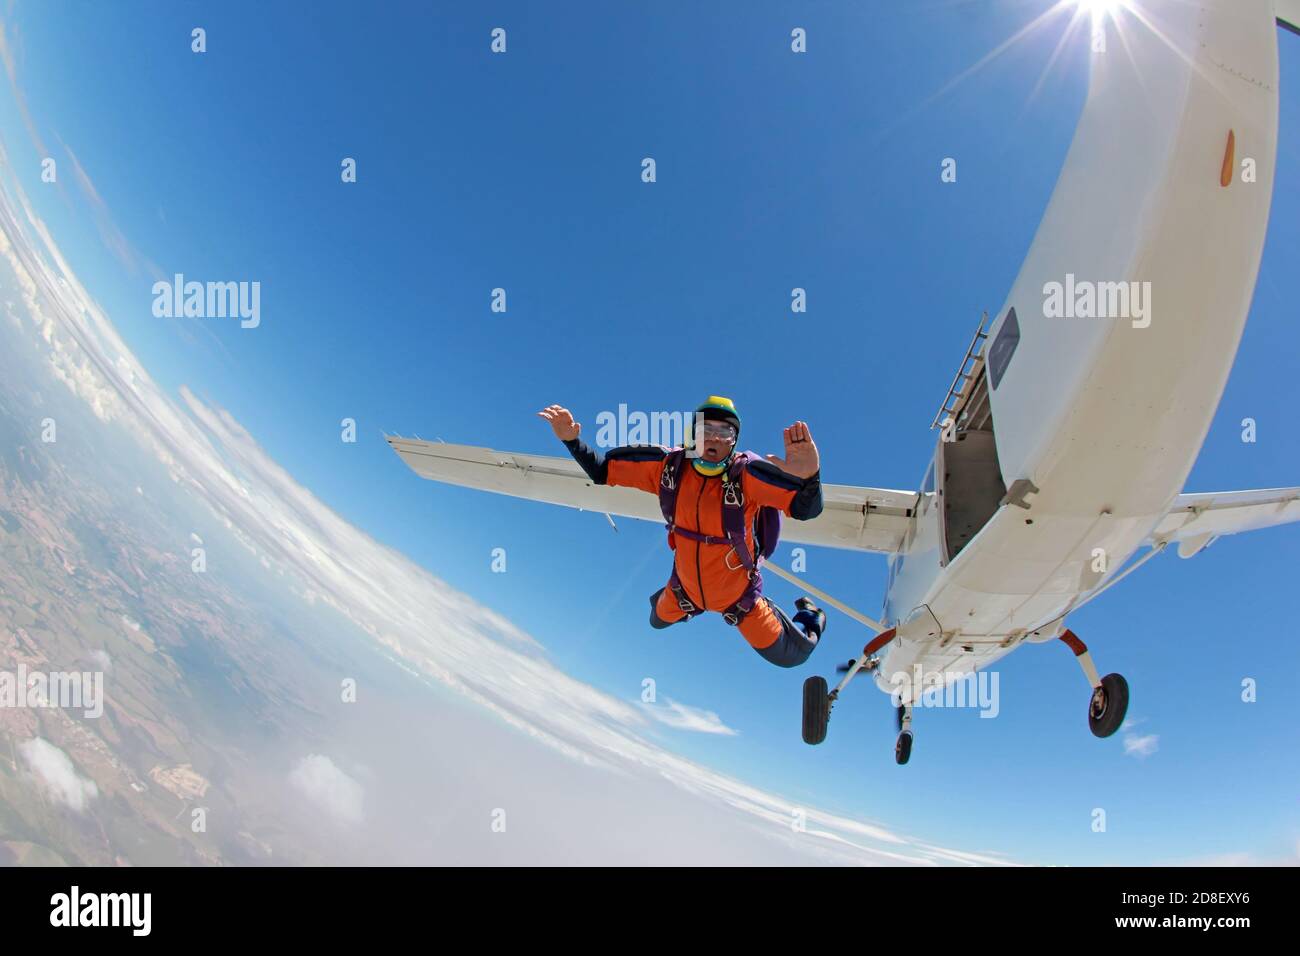 Old man realizing a dream, jumping from a plane Stock Photo